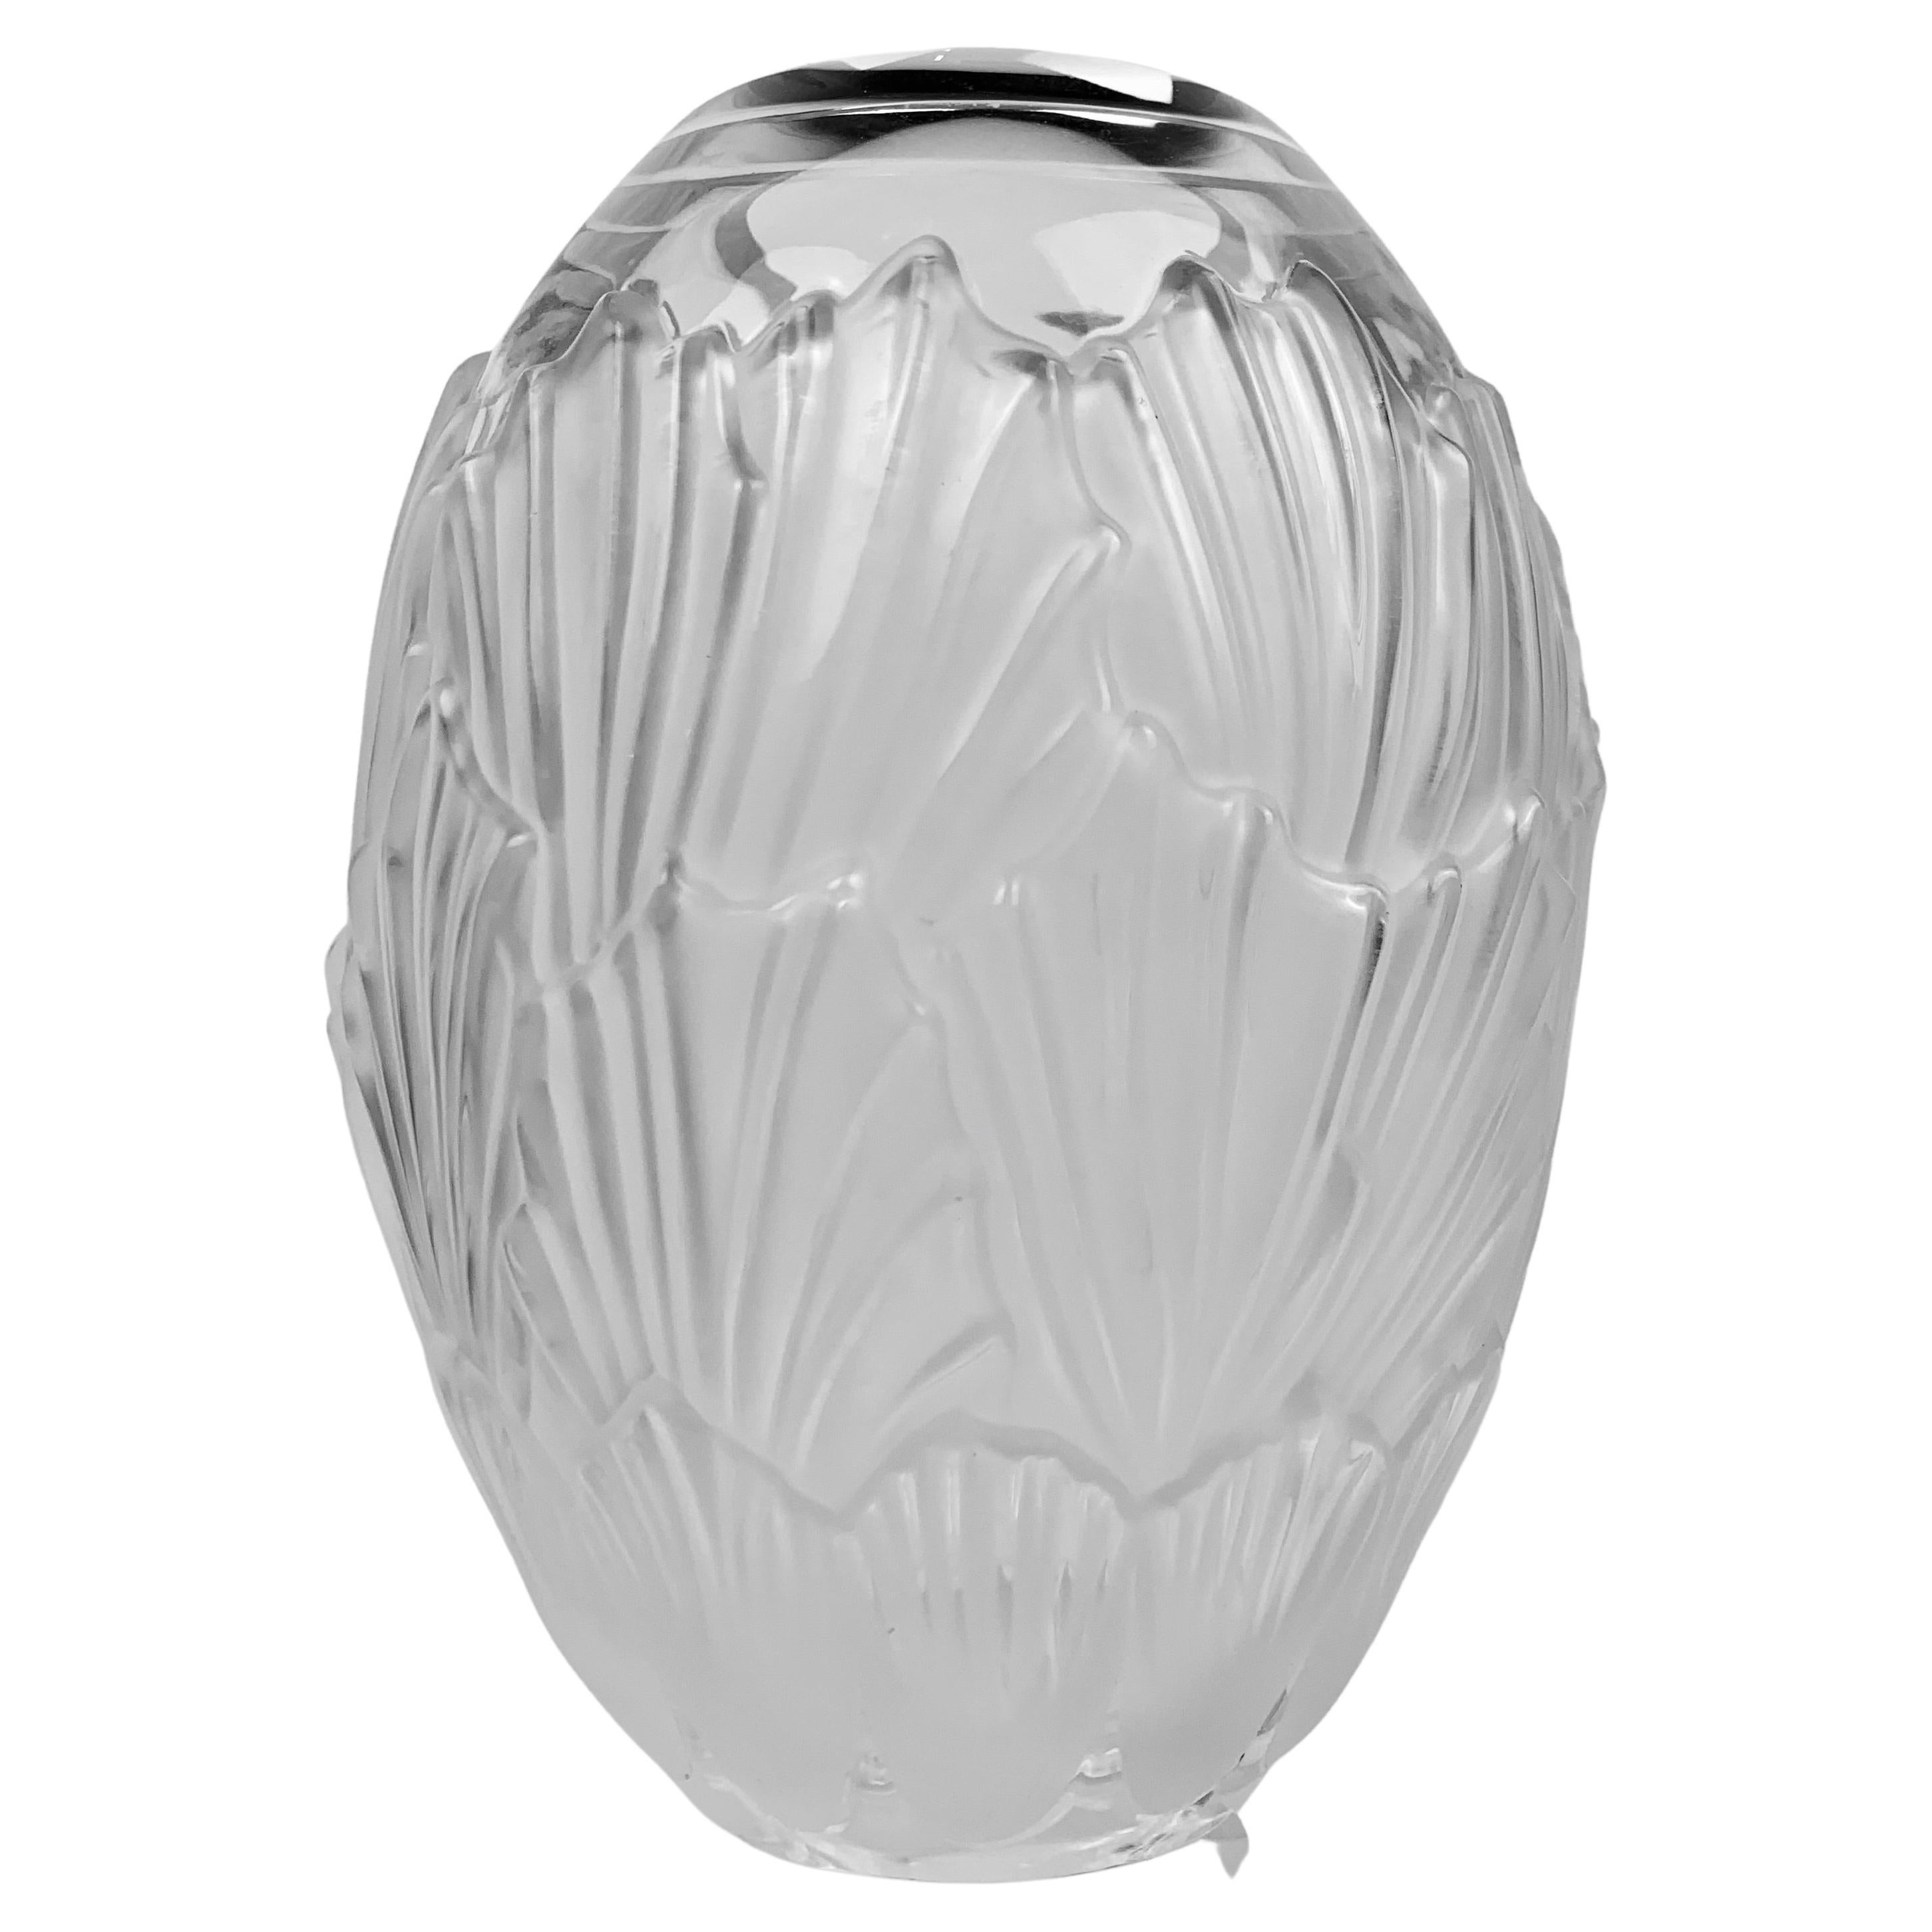  Sandrift by Lalique- Frosted Glass Vase, France, Scribe Signed